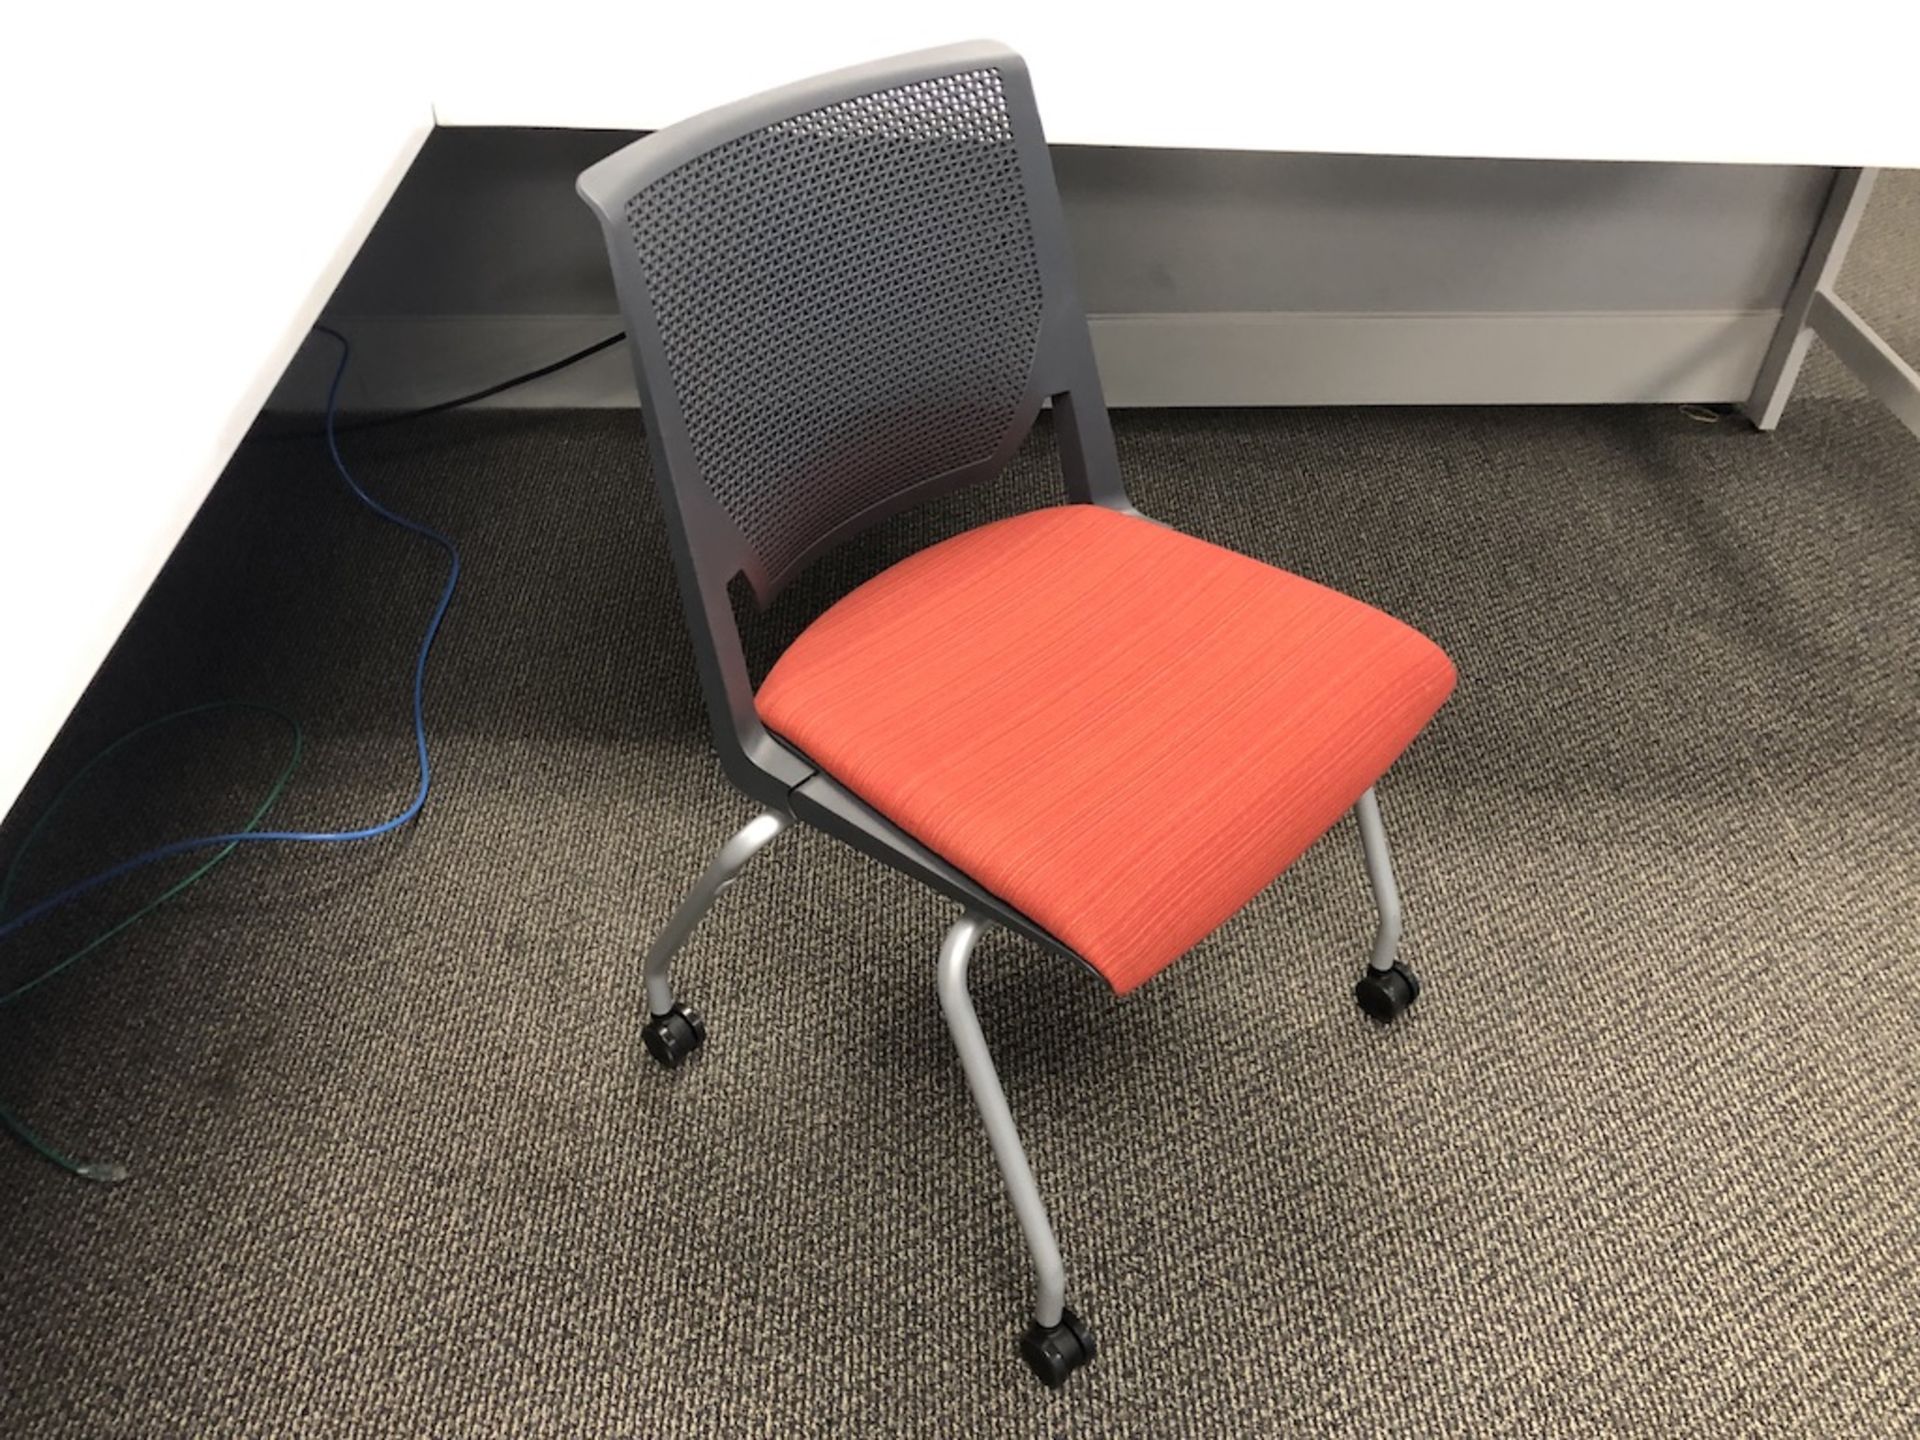 4 CASTER OFFICE CHAIR RED SEATING PAD   SCHNEIDER ELECTRIC- 6611 PRESTON AVE SUITE A - Image 2 of 3